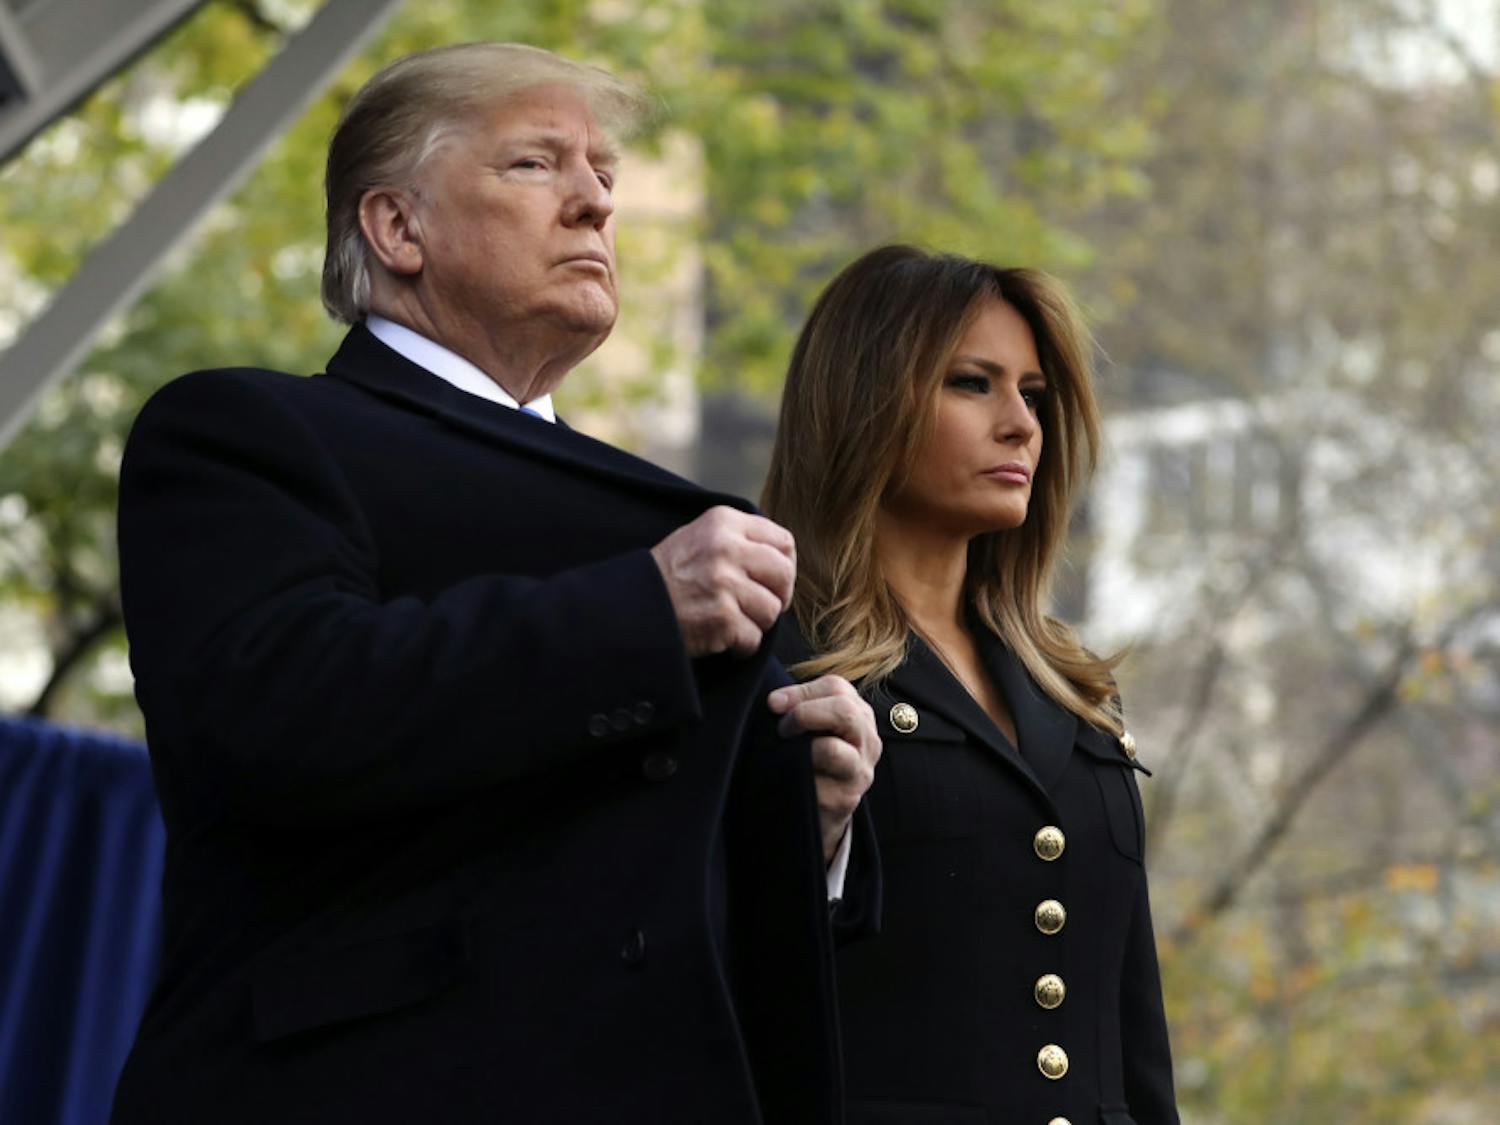 President Donald Trump and first lady Melania Trump attend ceremony at the New York City Veterans Day Parade at Madison Square Park in New York, Monday, Nov. 11, 2019. (AP Photo/Andrew Harnik)